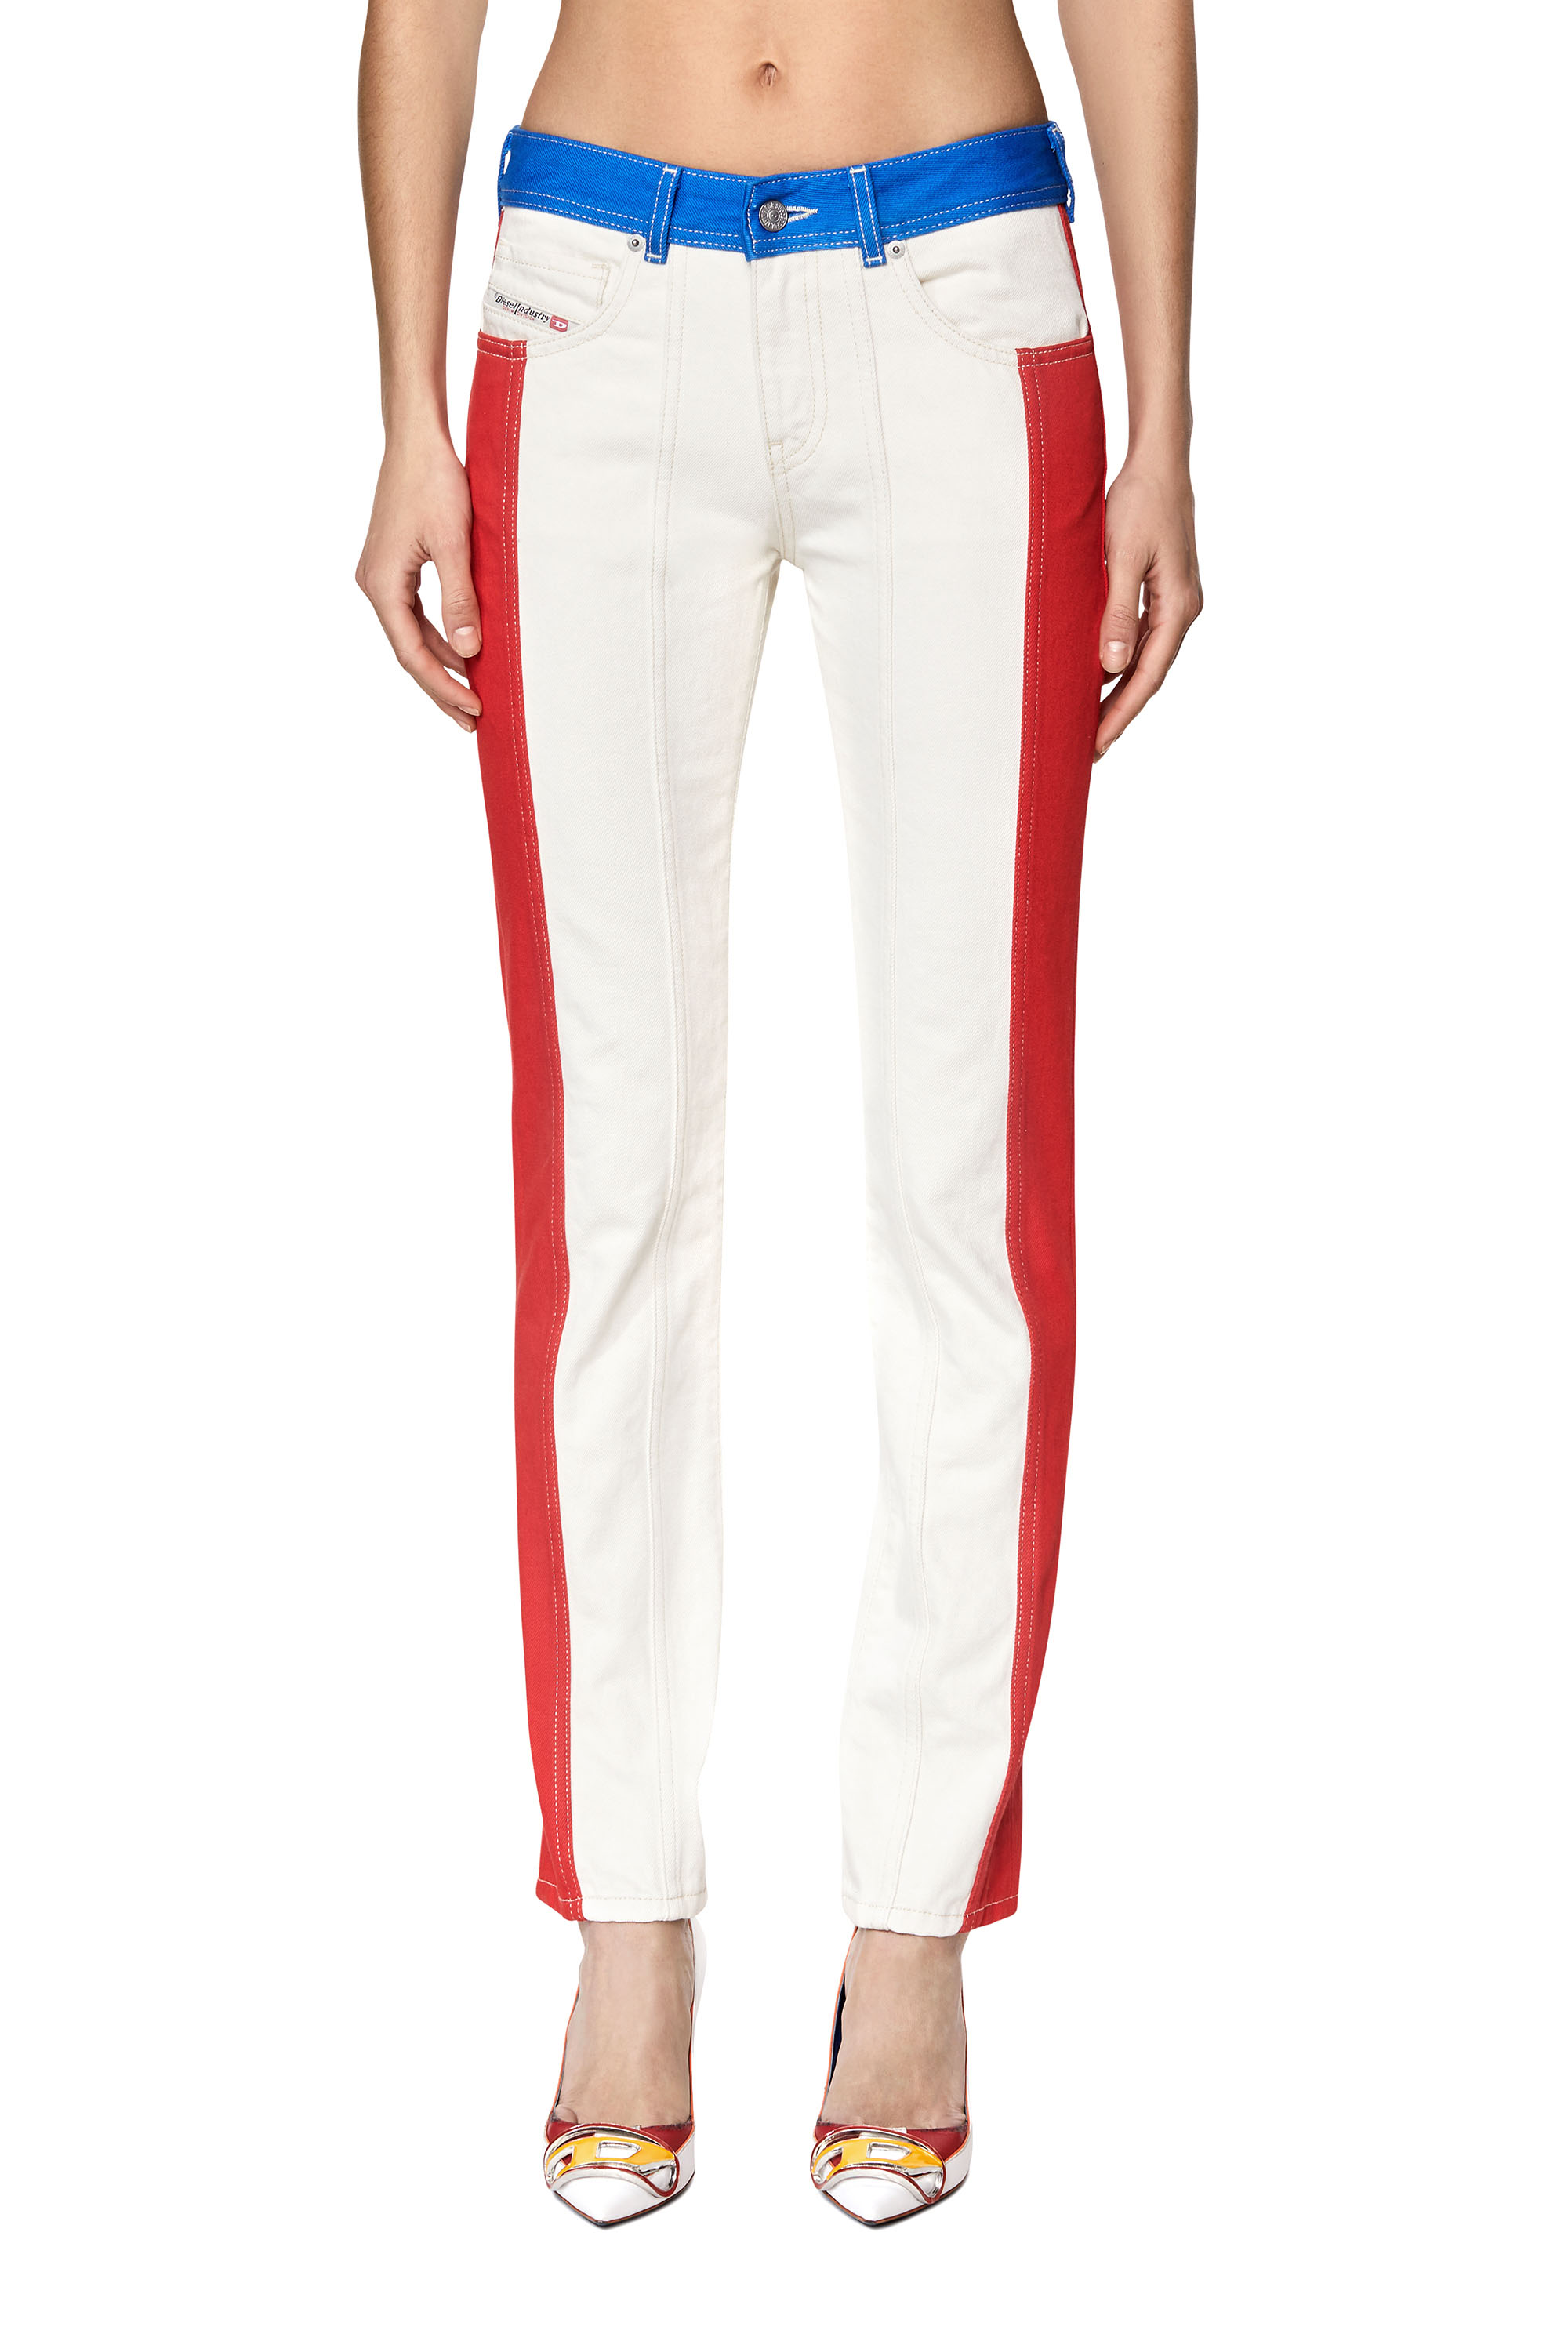 2002 0EIAR Straight Jeans, White/Red - Jeans